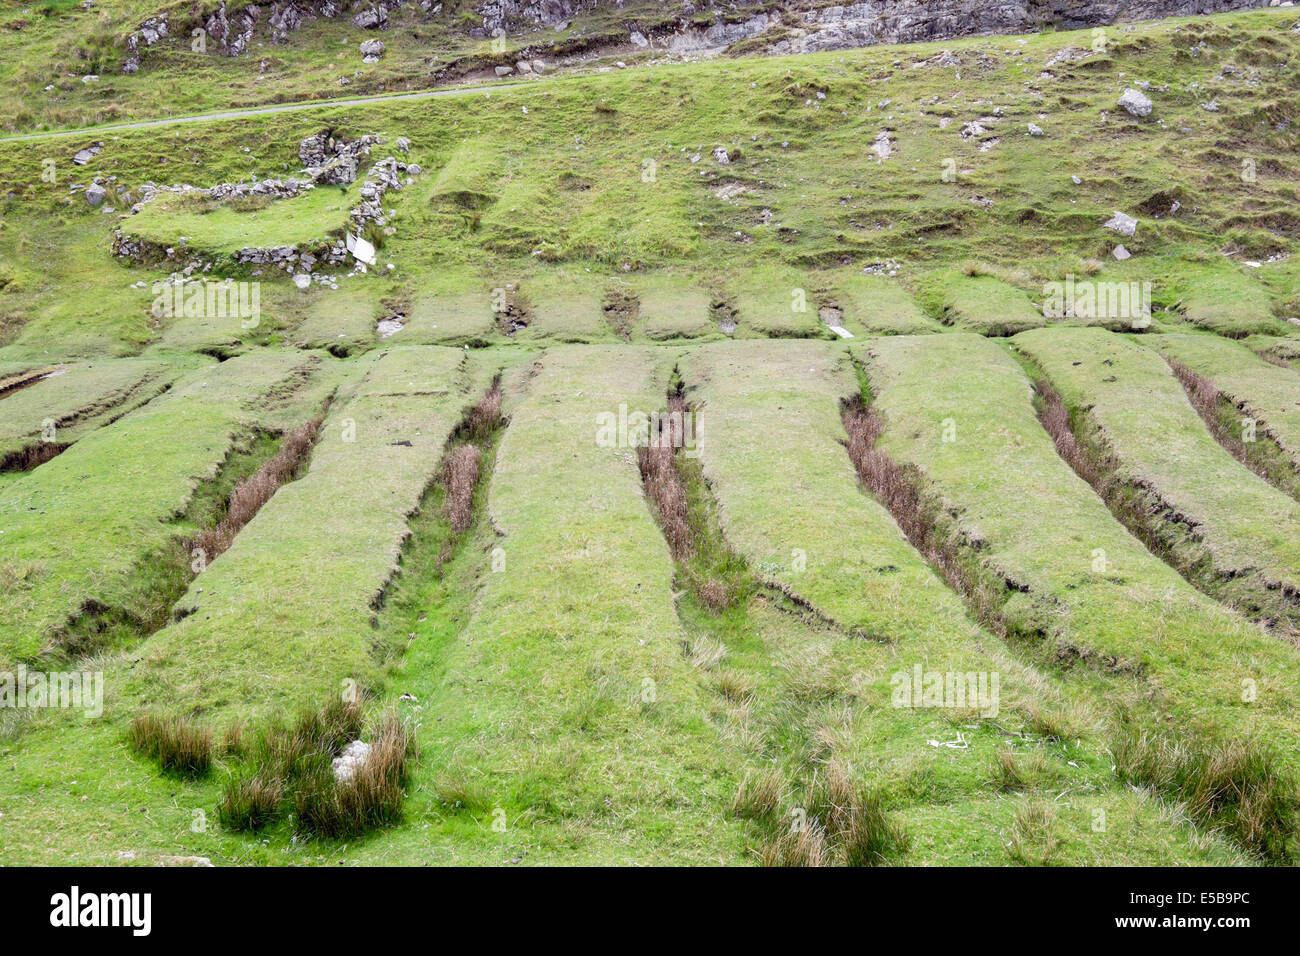 Old Croft farm showing abandoned 'lazy beds' ridge and furrow field cultivation for growing potatoes. Outer Hebrides Scotland UK Stock Photo